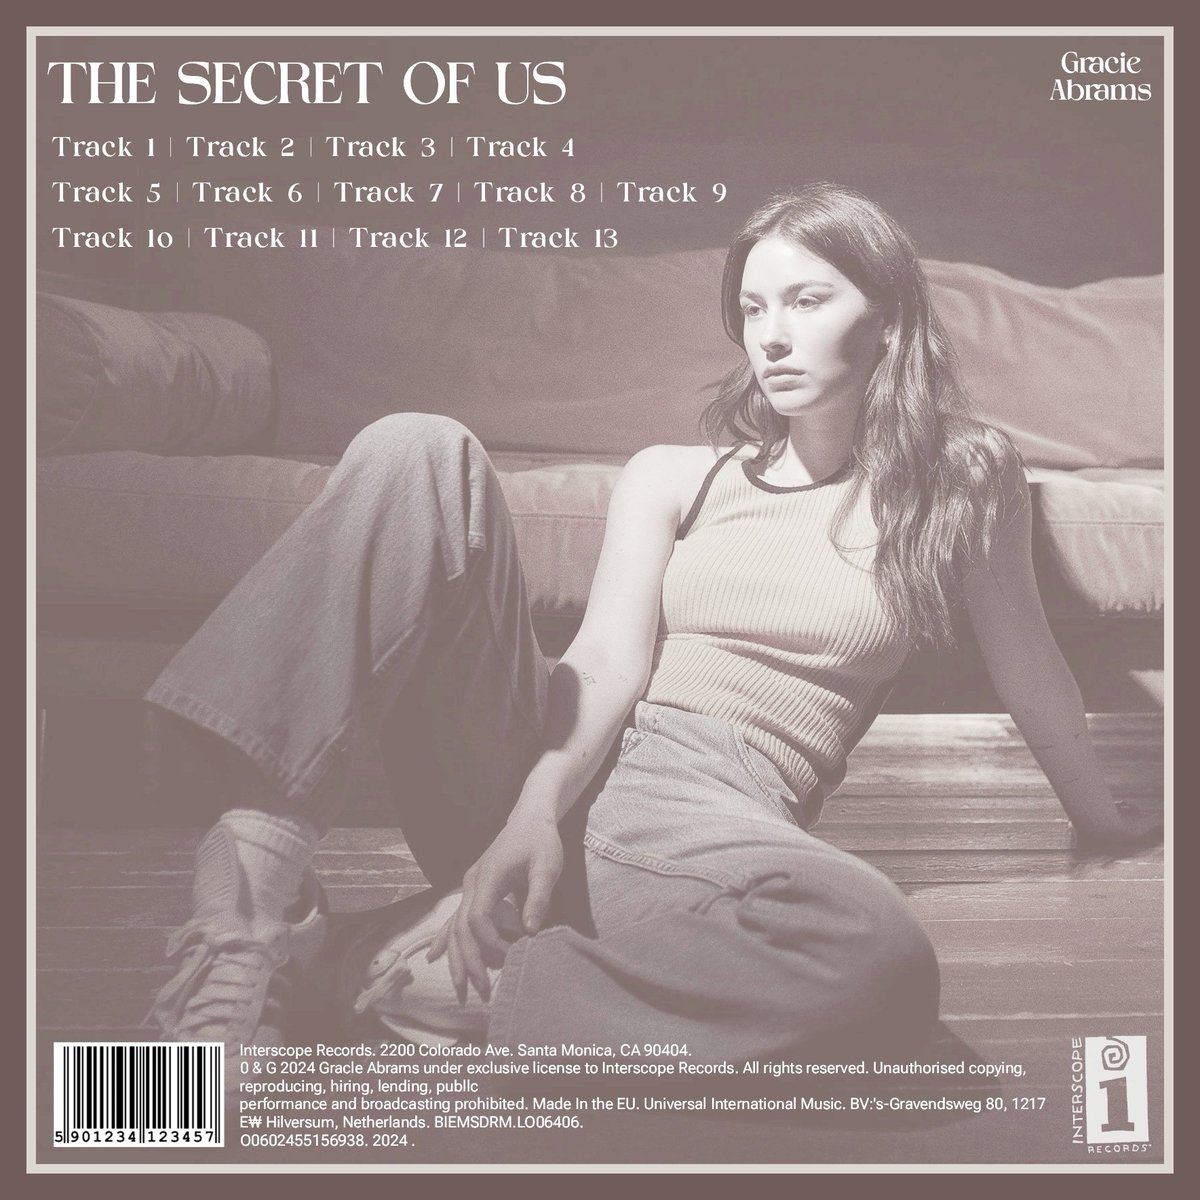 reimagined art cover and back cover for The Secret of Us